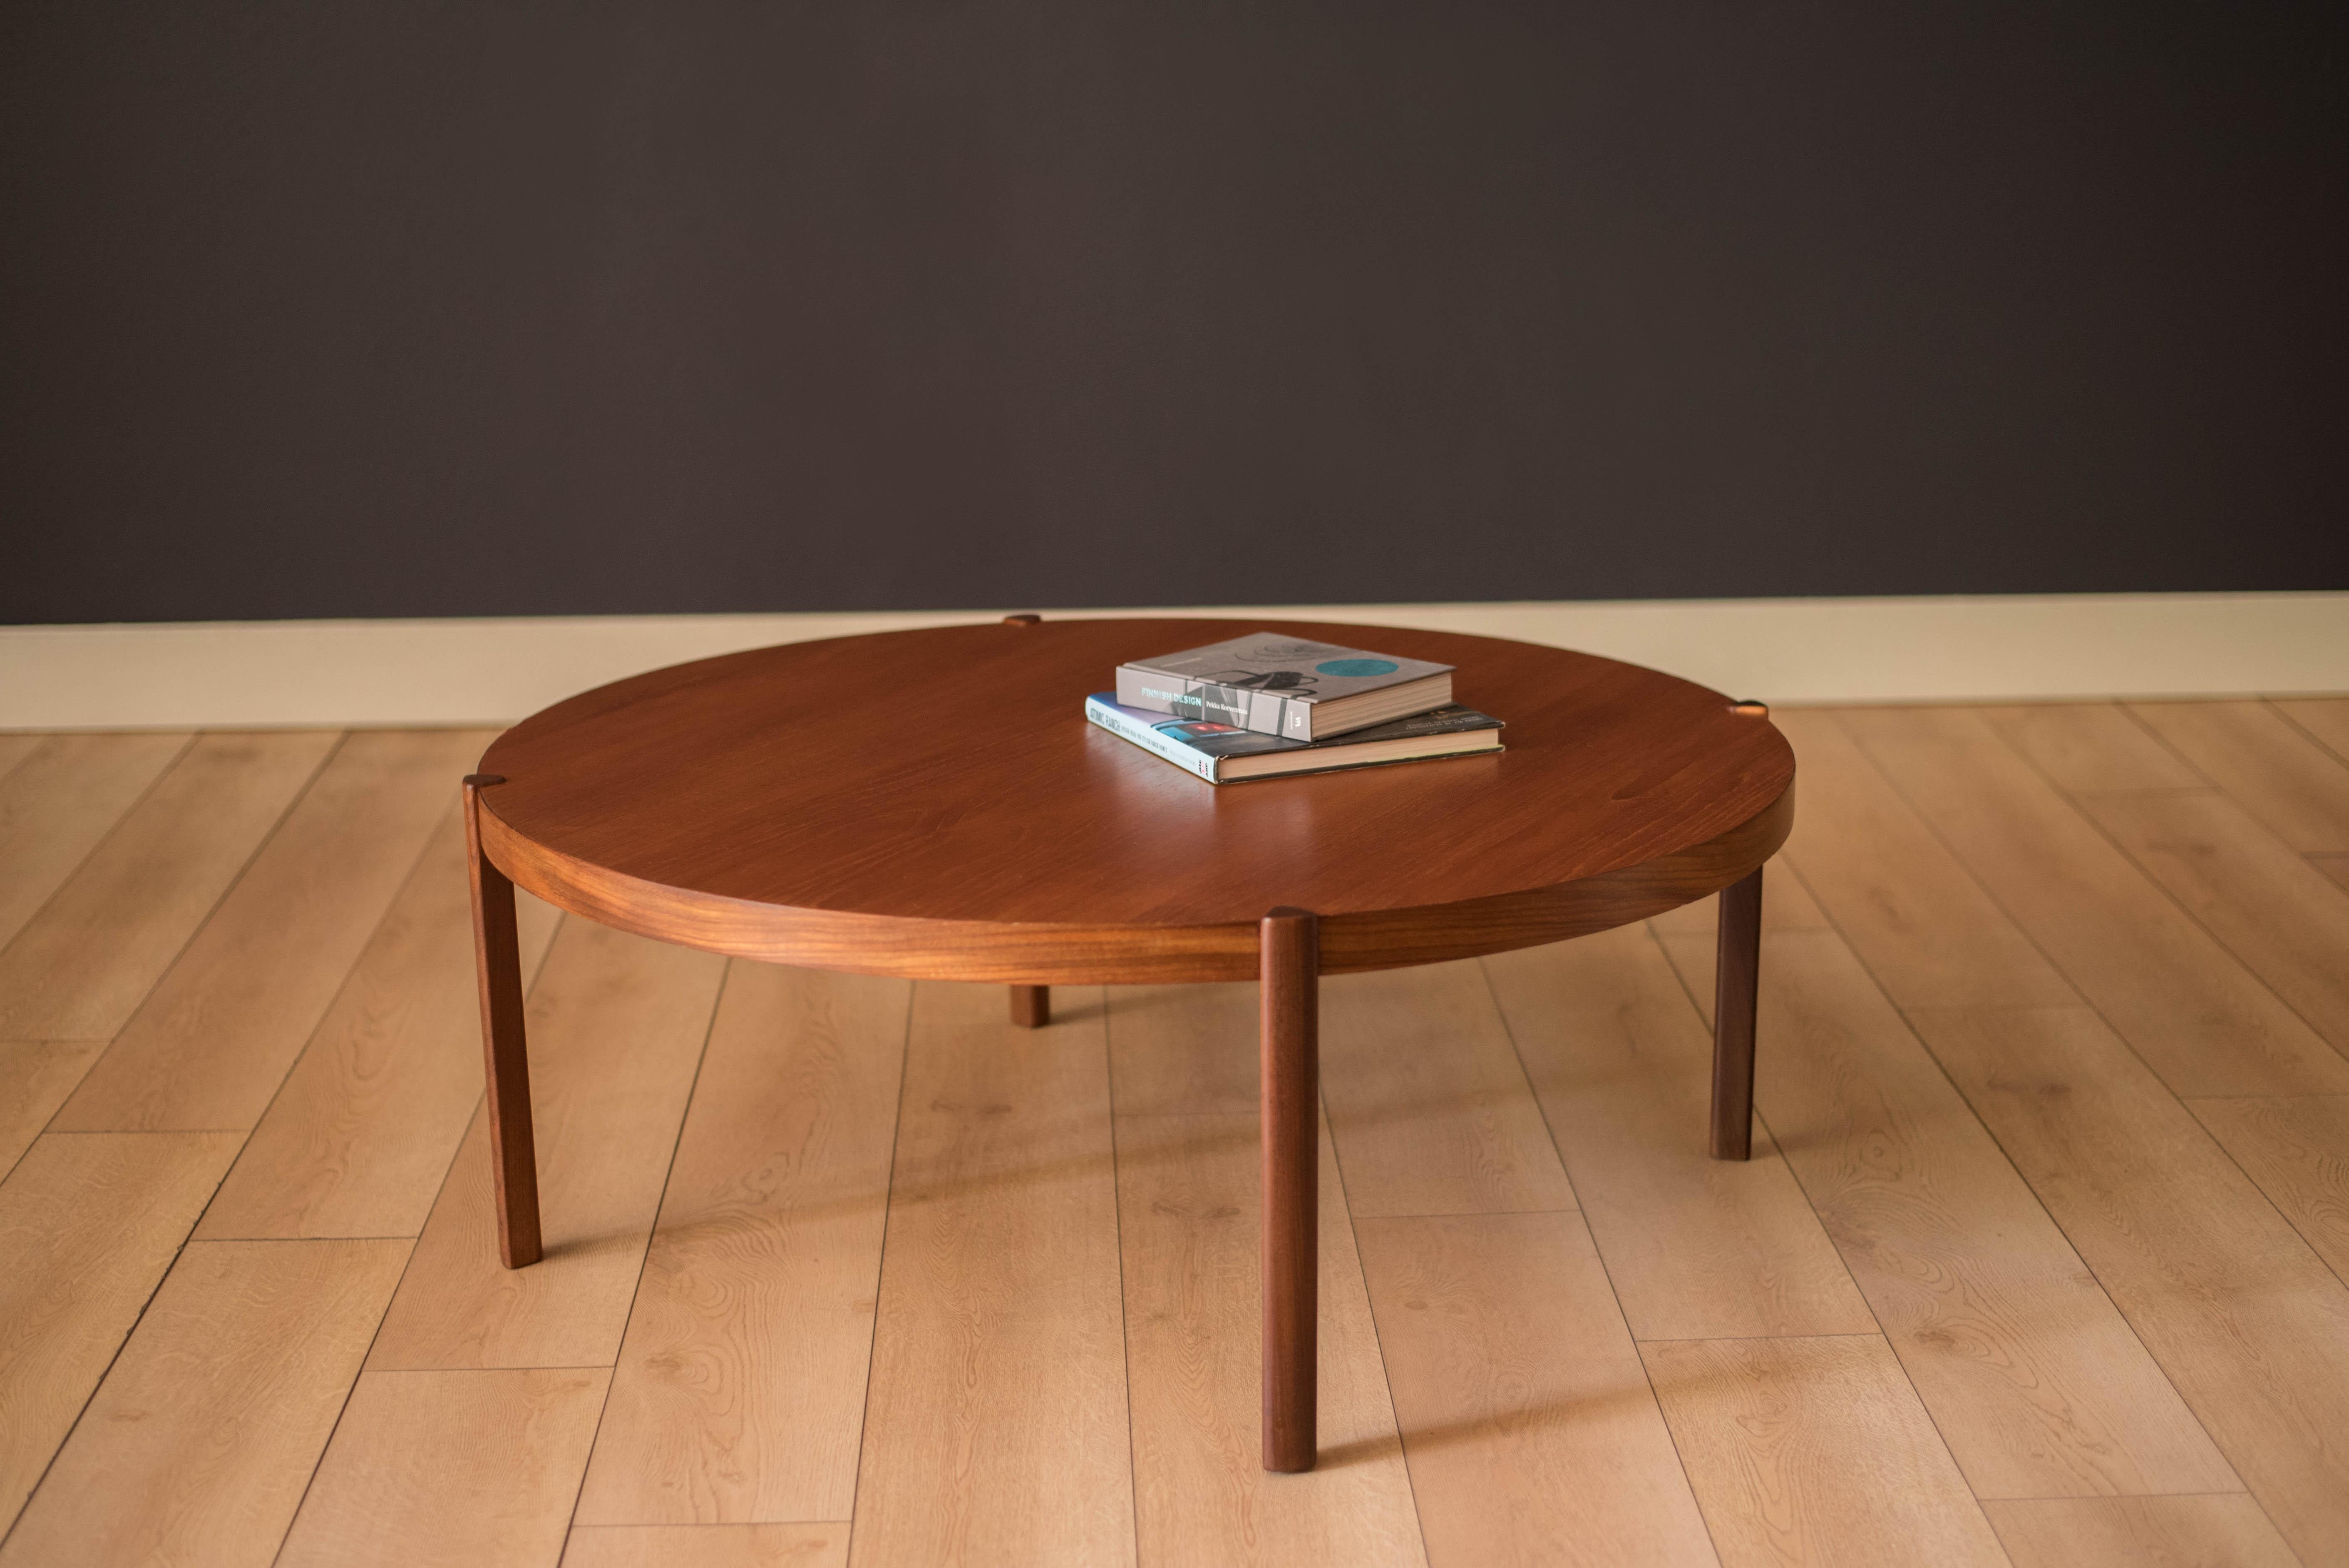 Vintage round coffee table in teak by Hans Olsen, Denmark circa 1960's. This timeless and simple design features warm teak grains that sits at a low profile. Supporting angular legs are crafted in a contasting teak afromasia.